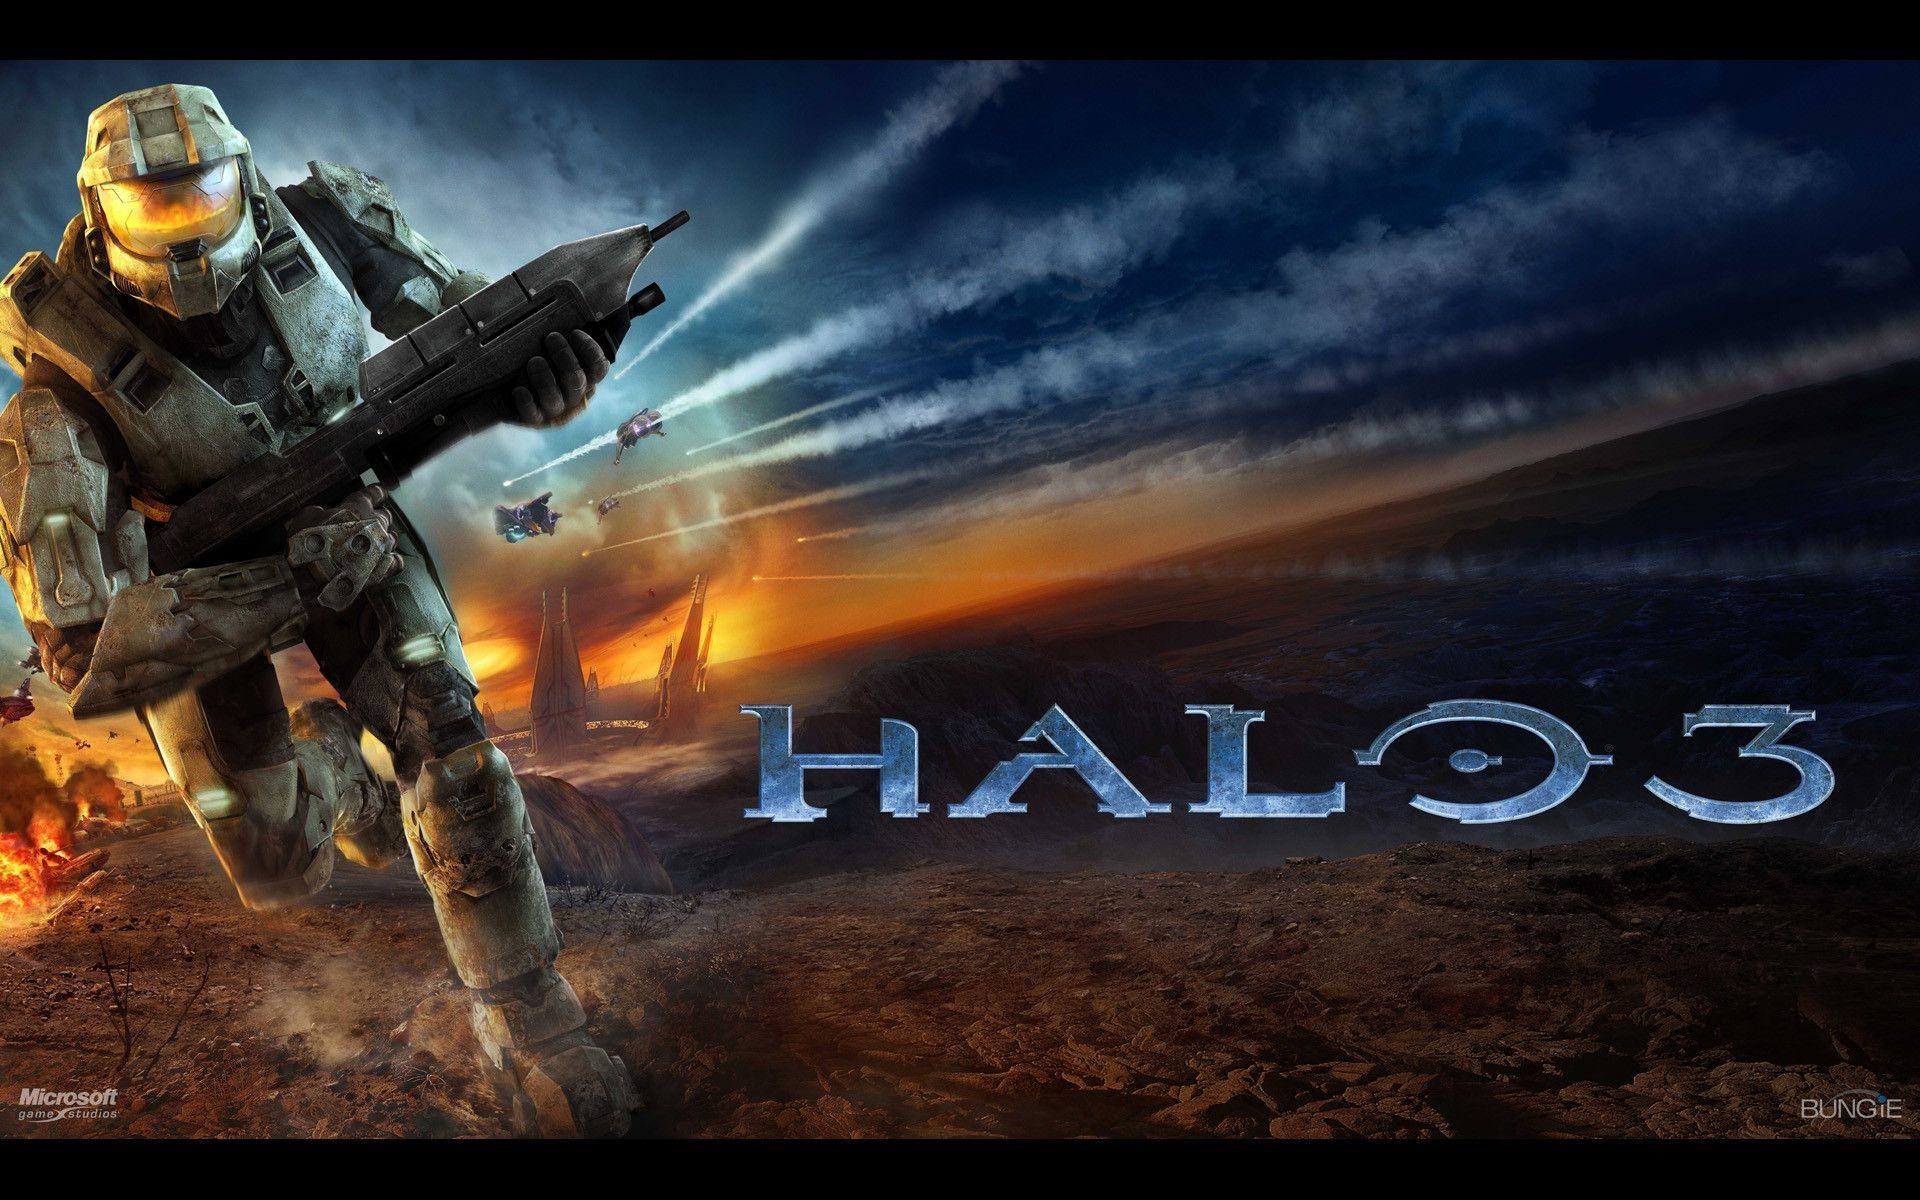 1920x1200 Halo 3 Wallpapers - Full HD wallpaper search